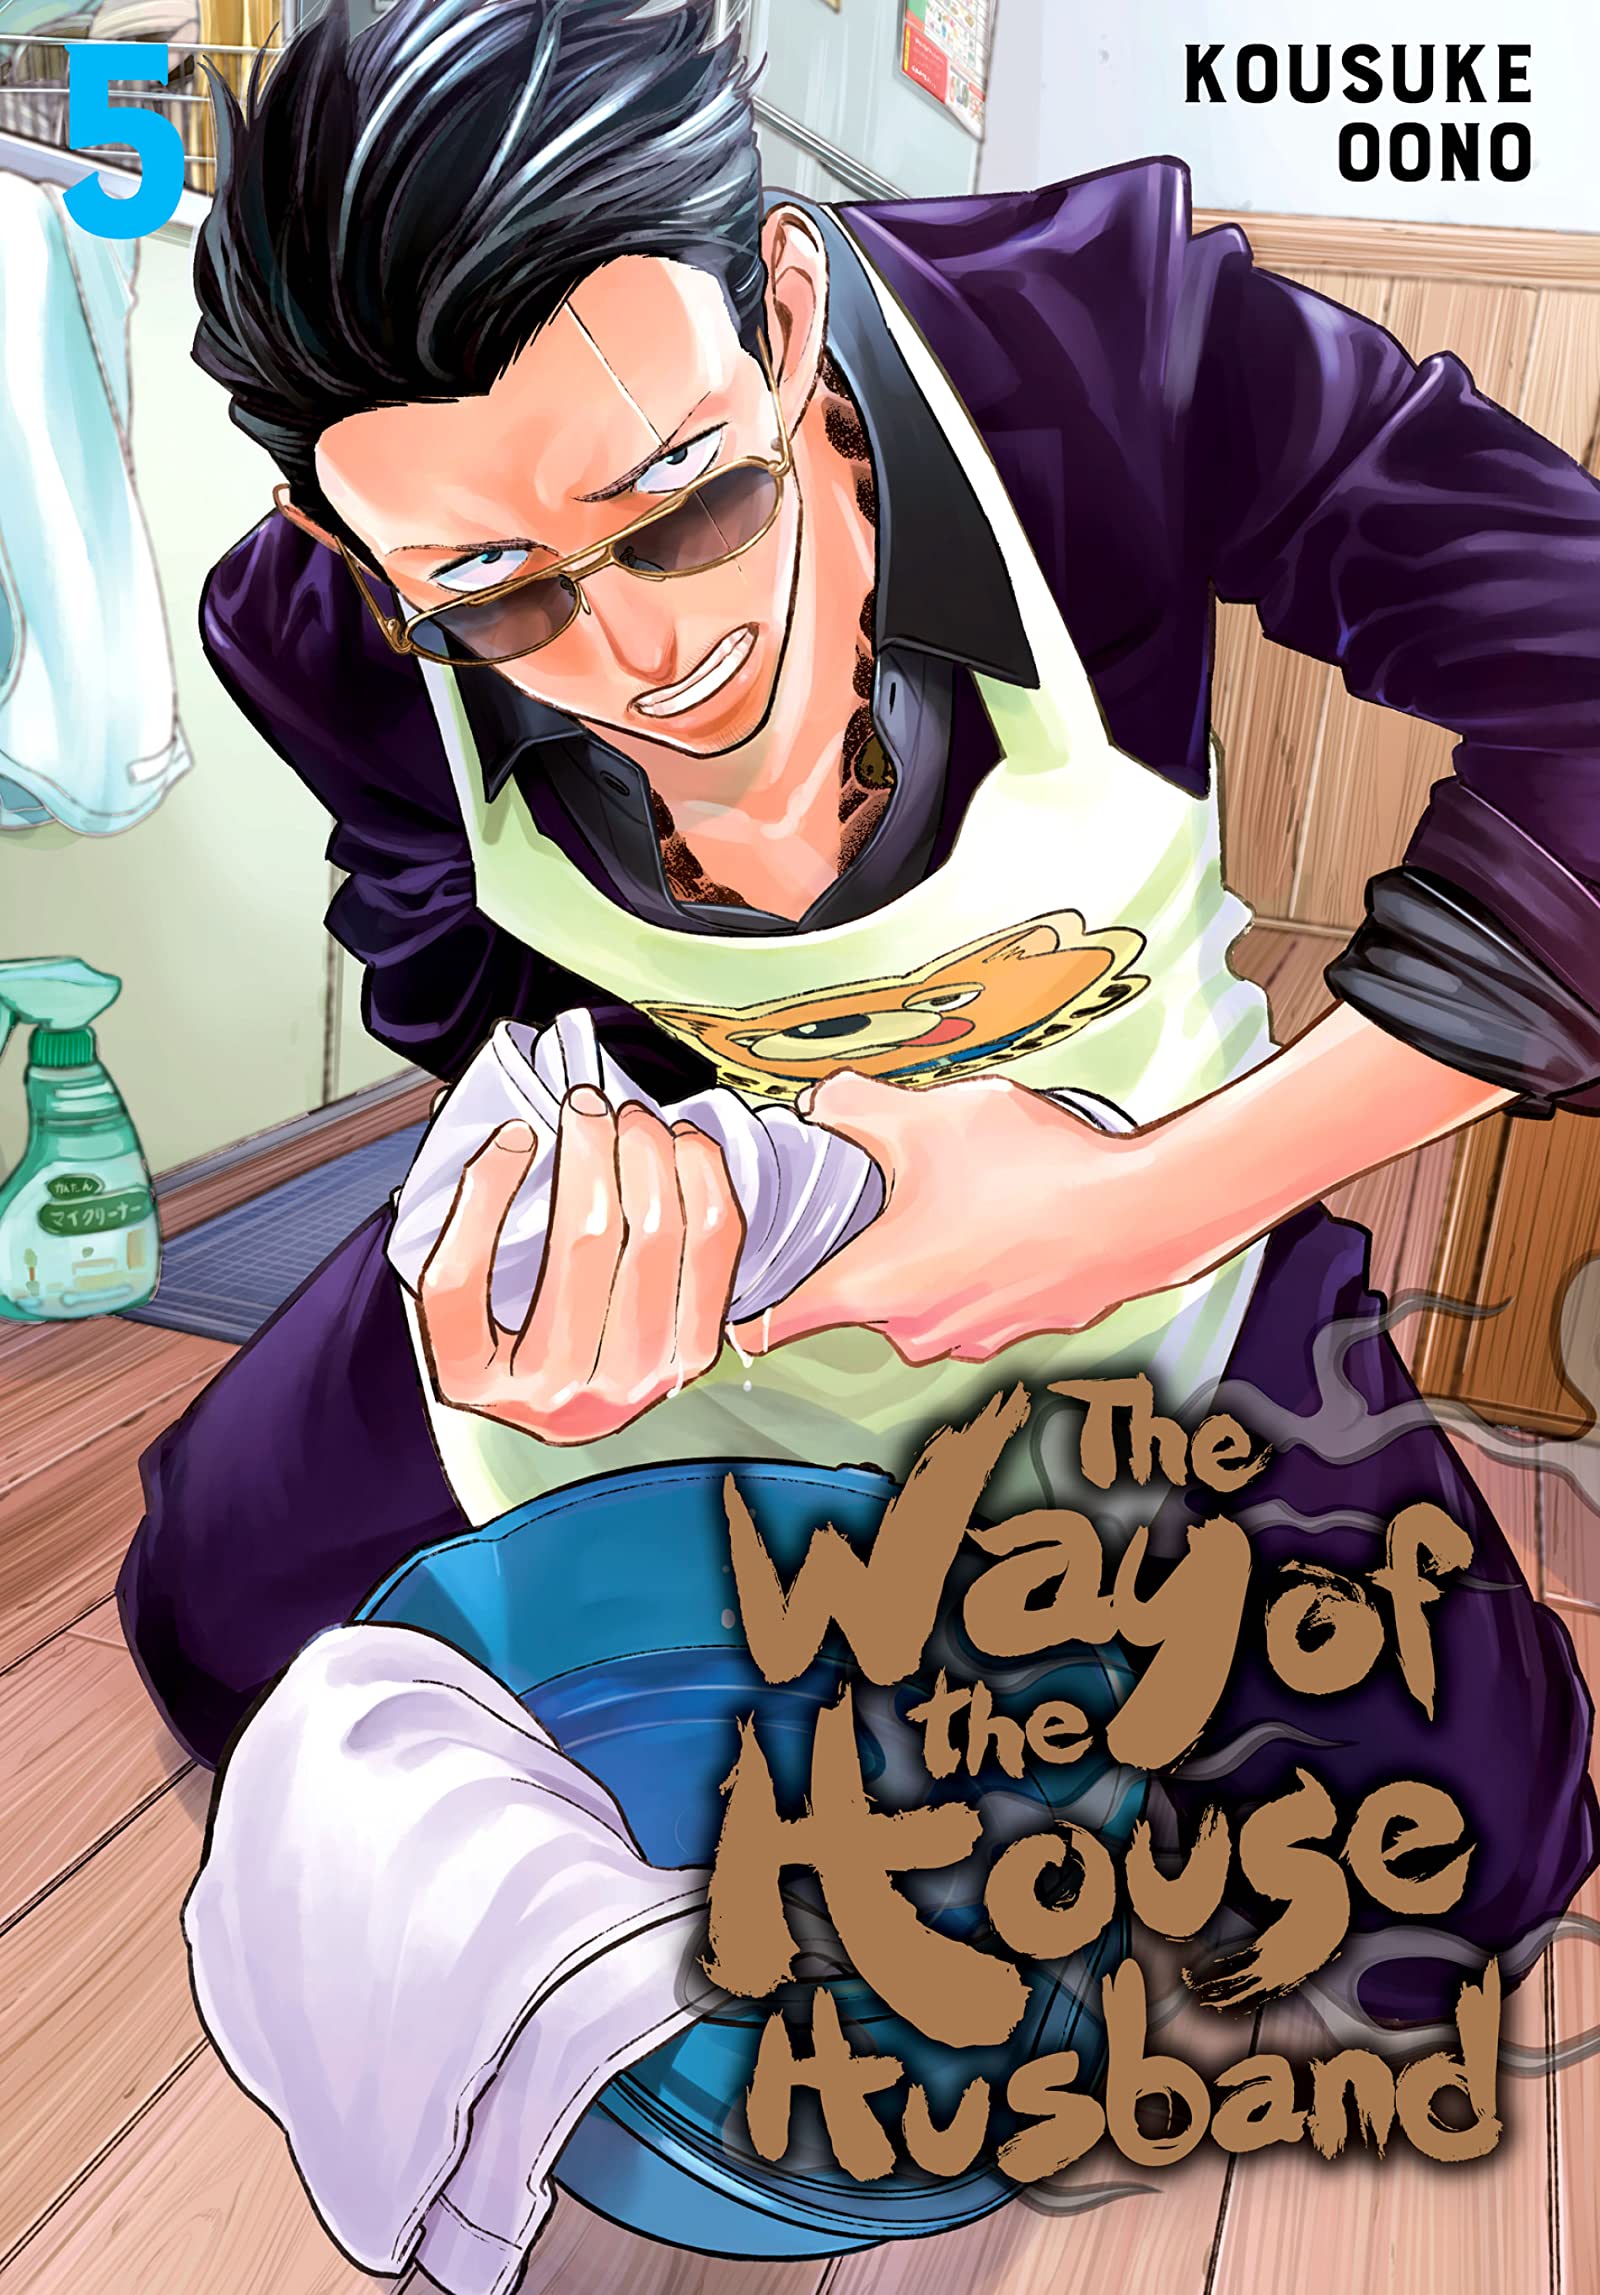 The Way of the Househusband - Volume 5